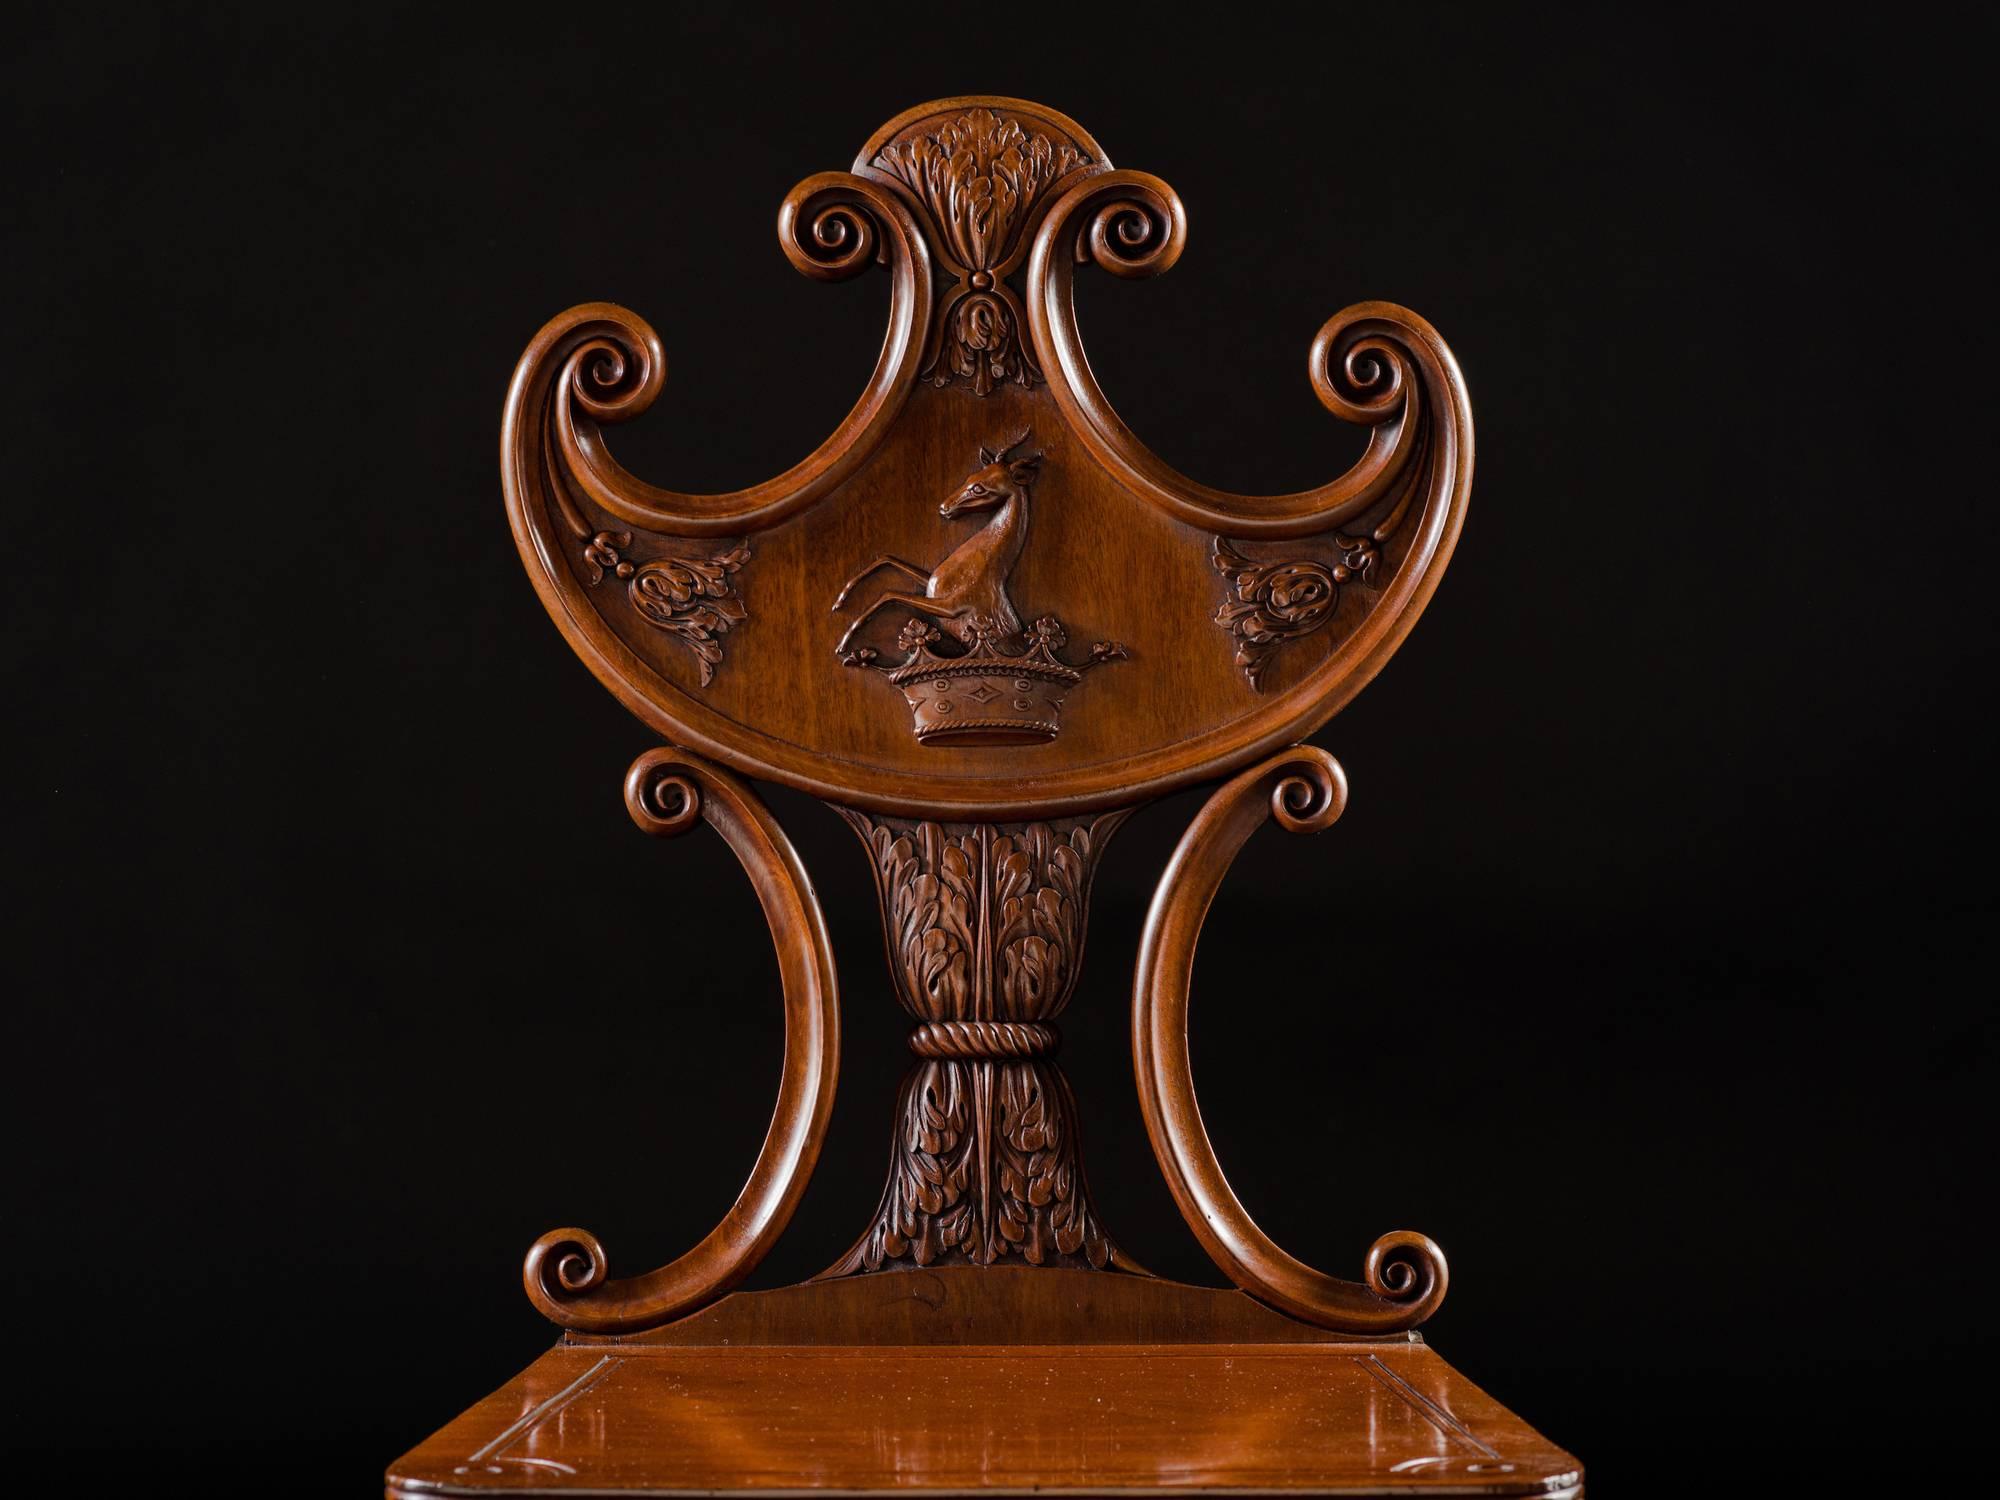 Each pelta-form backrest centred by a heraldic crest and supported on scroll-carved stiles centring a leaf-carved waisted support, each plank seat raised on turned, tapering reeded legs.

Sheraton in his cabinet dictionary (1803) introduces hall